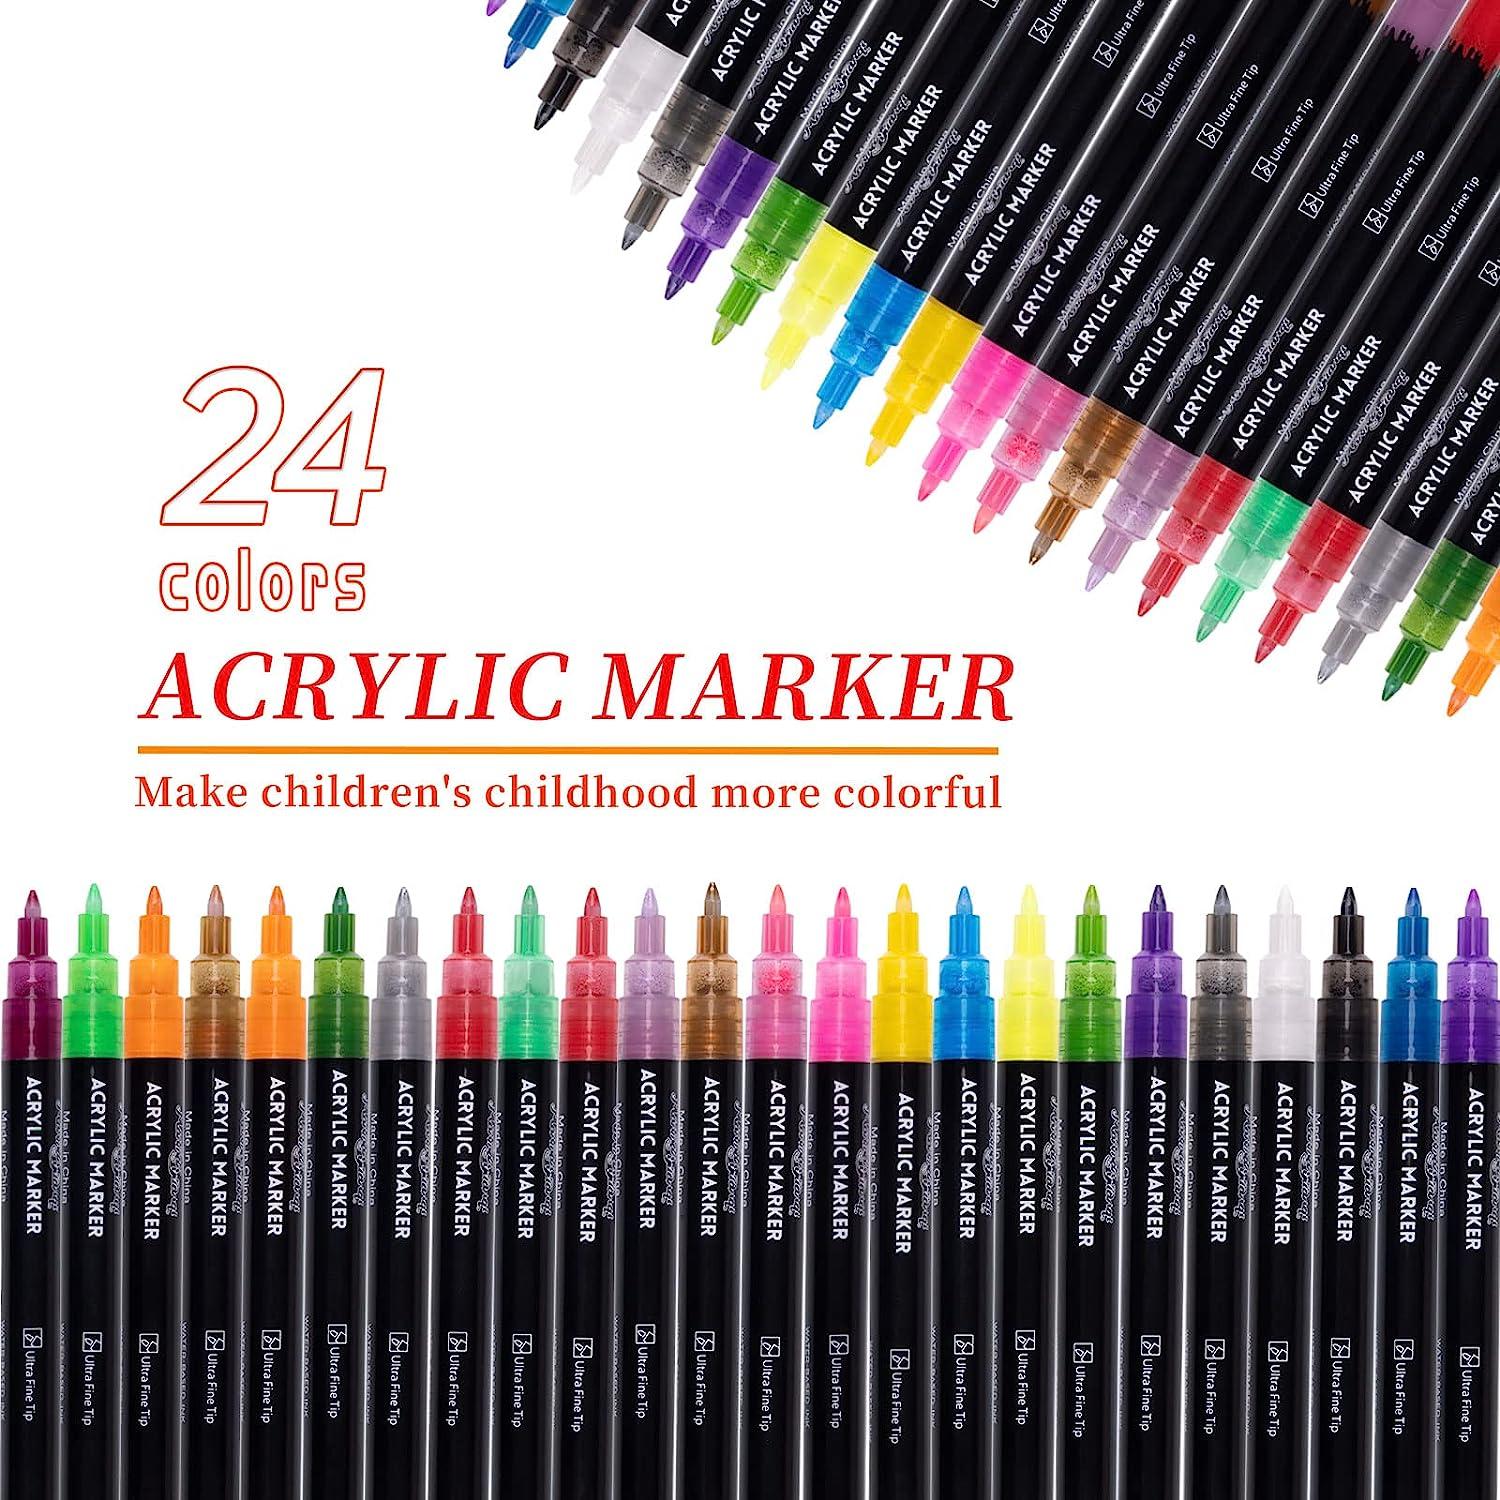 24 Colors Acrylic Paint Pens, Dual Tip Pens With Medium Tip and Brush Tip  for Rock Painting, Ceramic, Wood, Plastic, Calligraphy, Scrapbooking, Brush